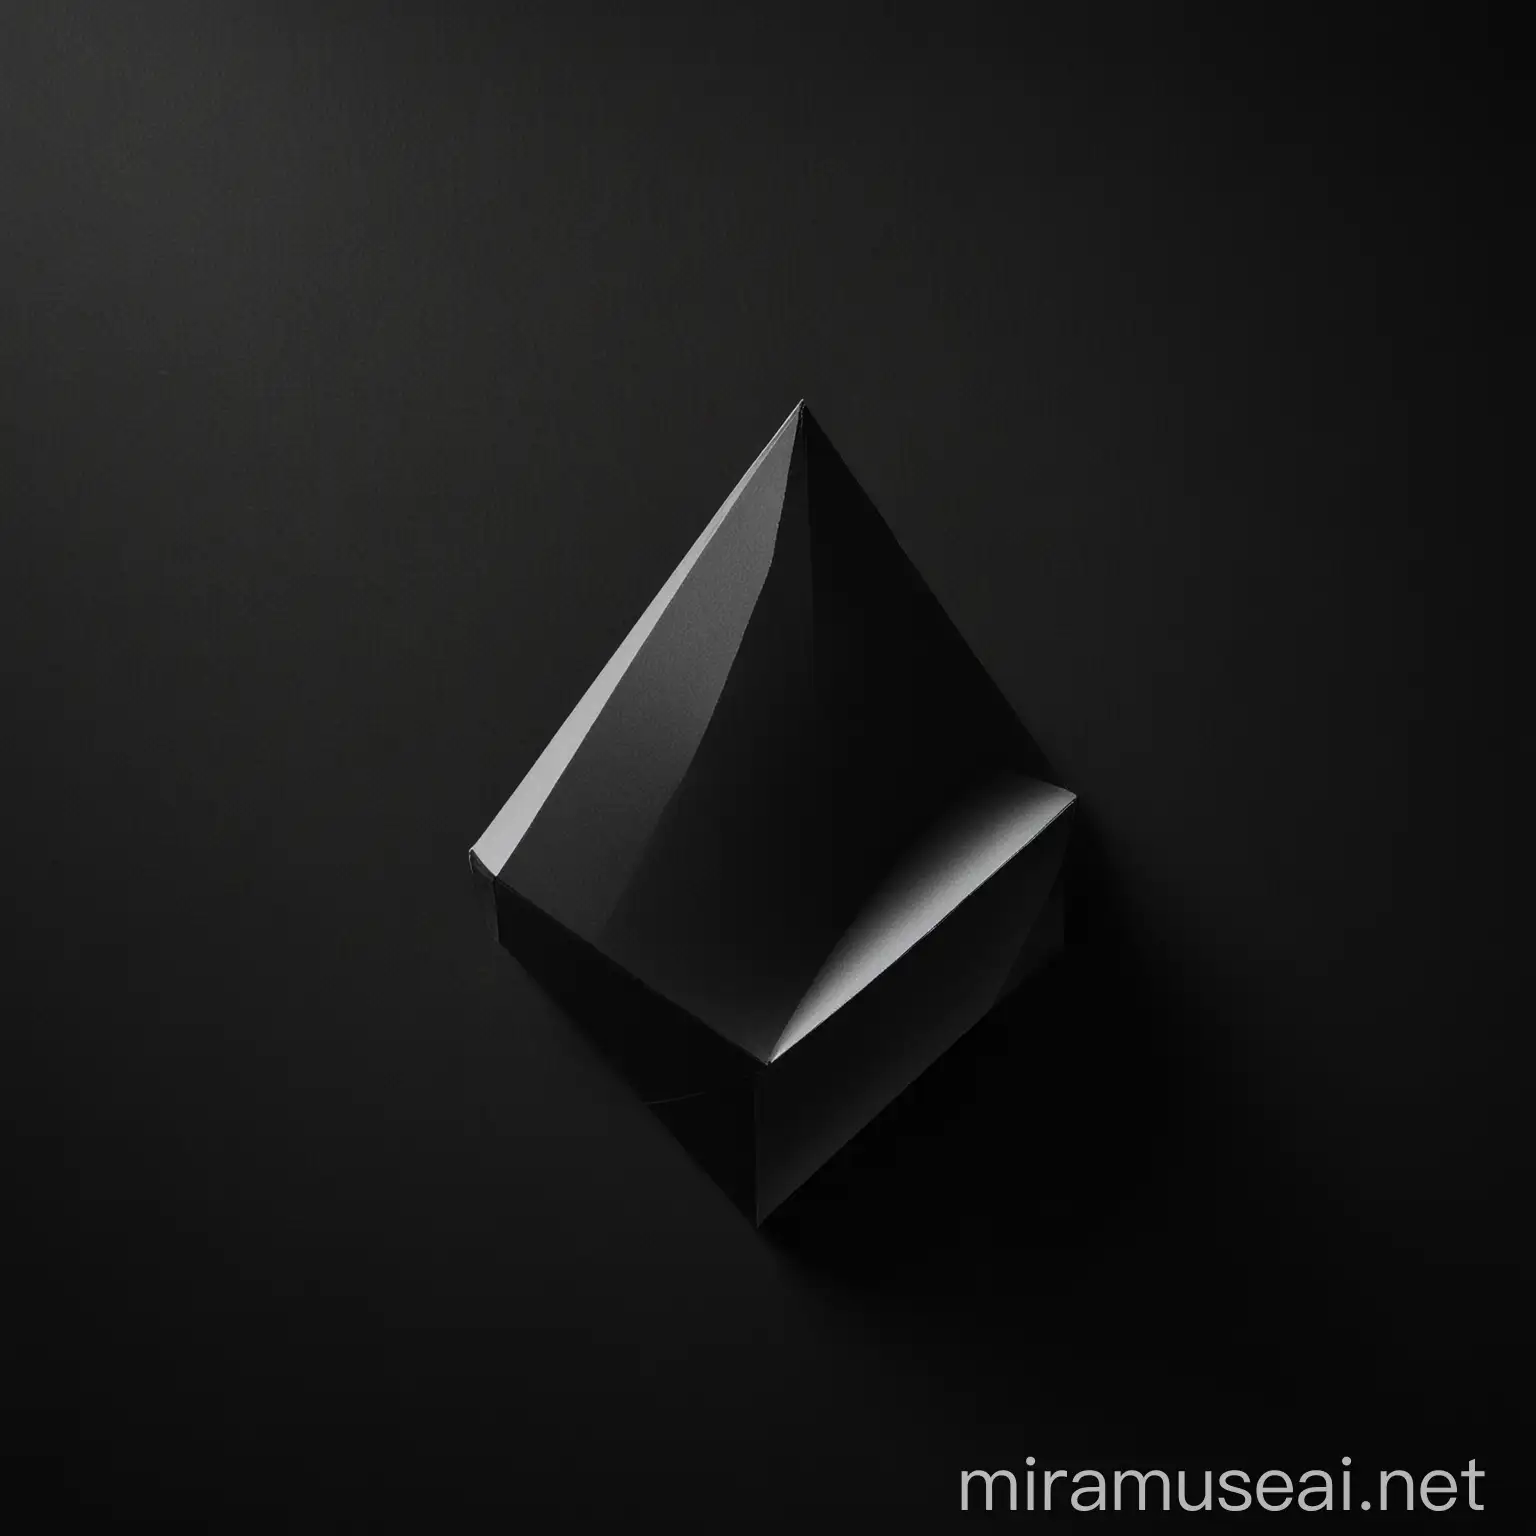 black background with a simple geometric shape in white

